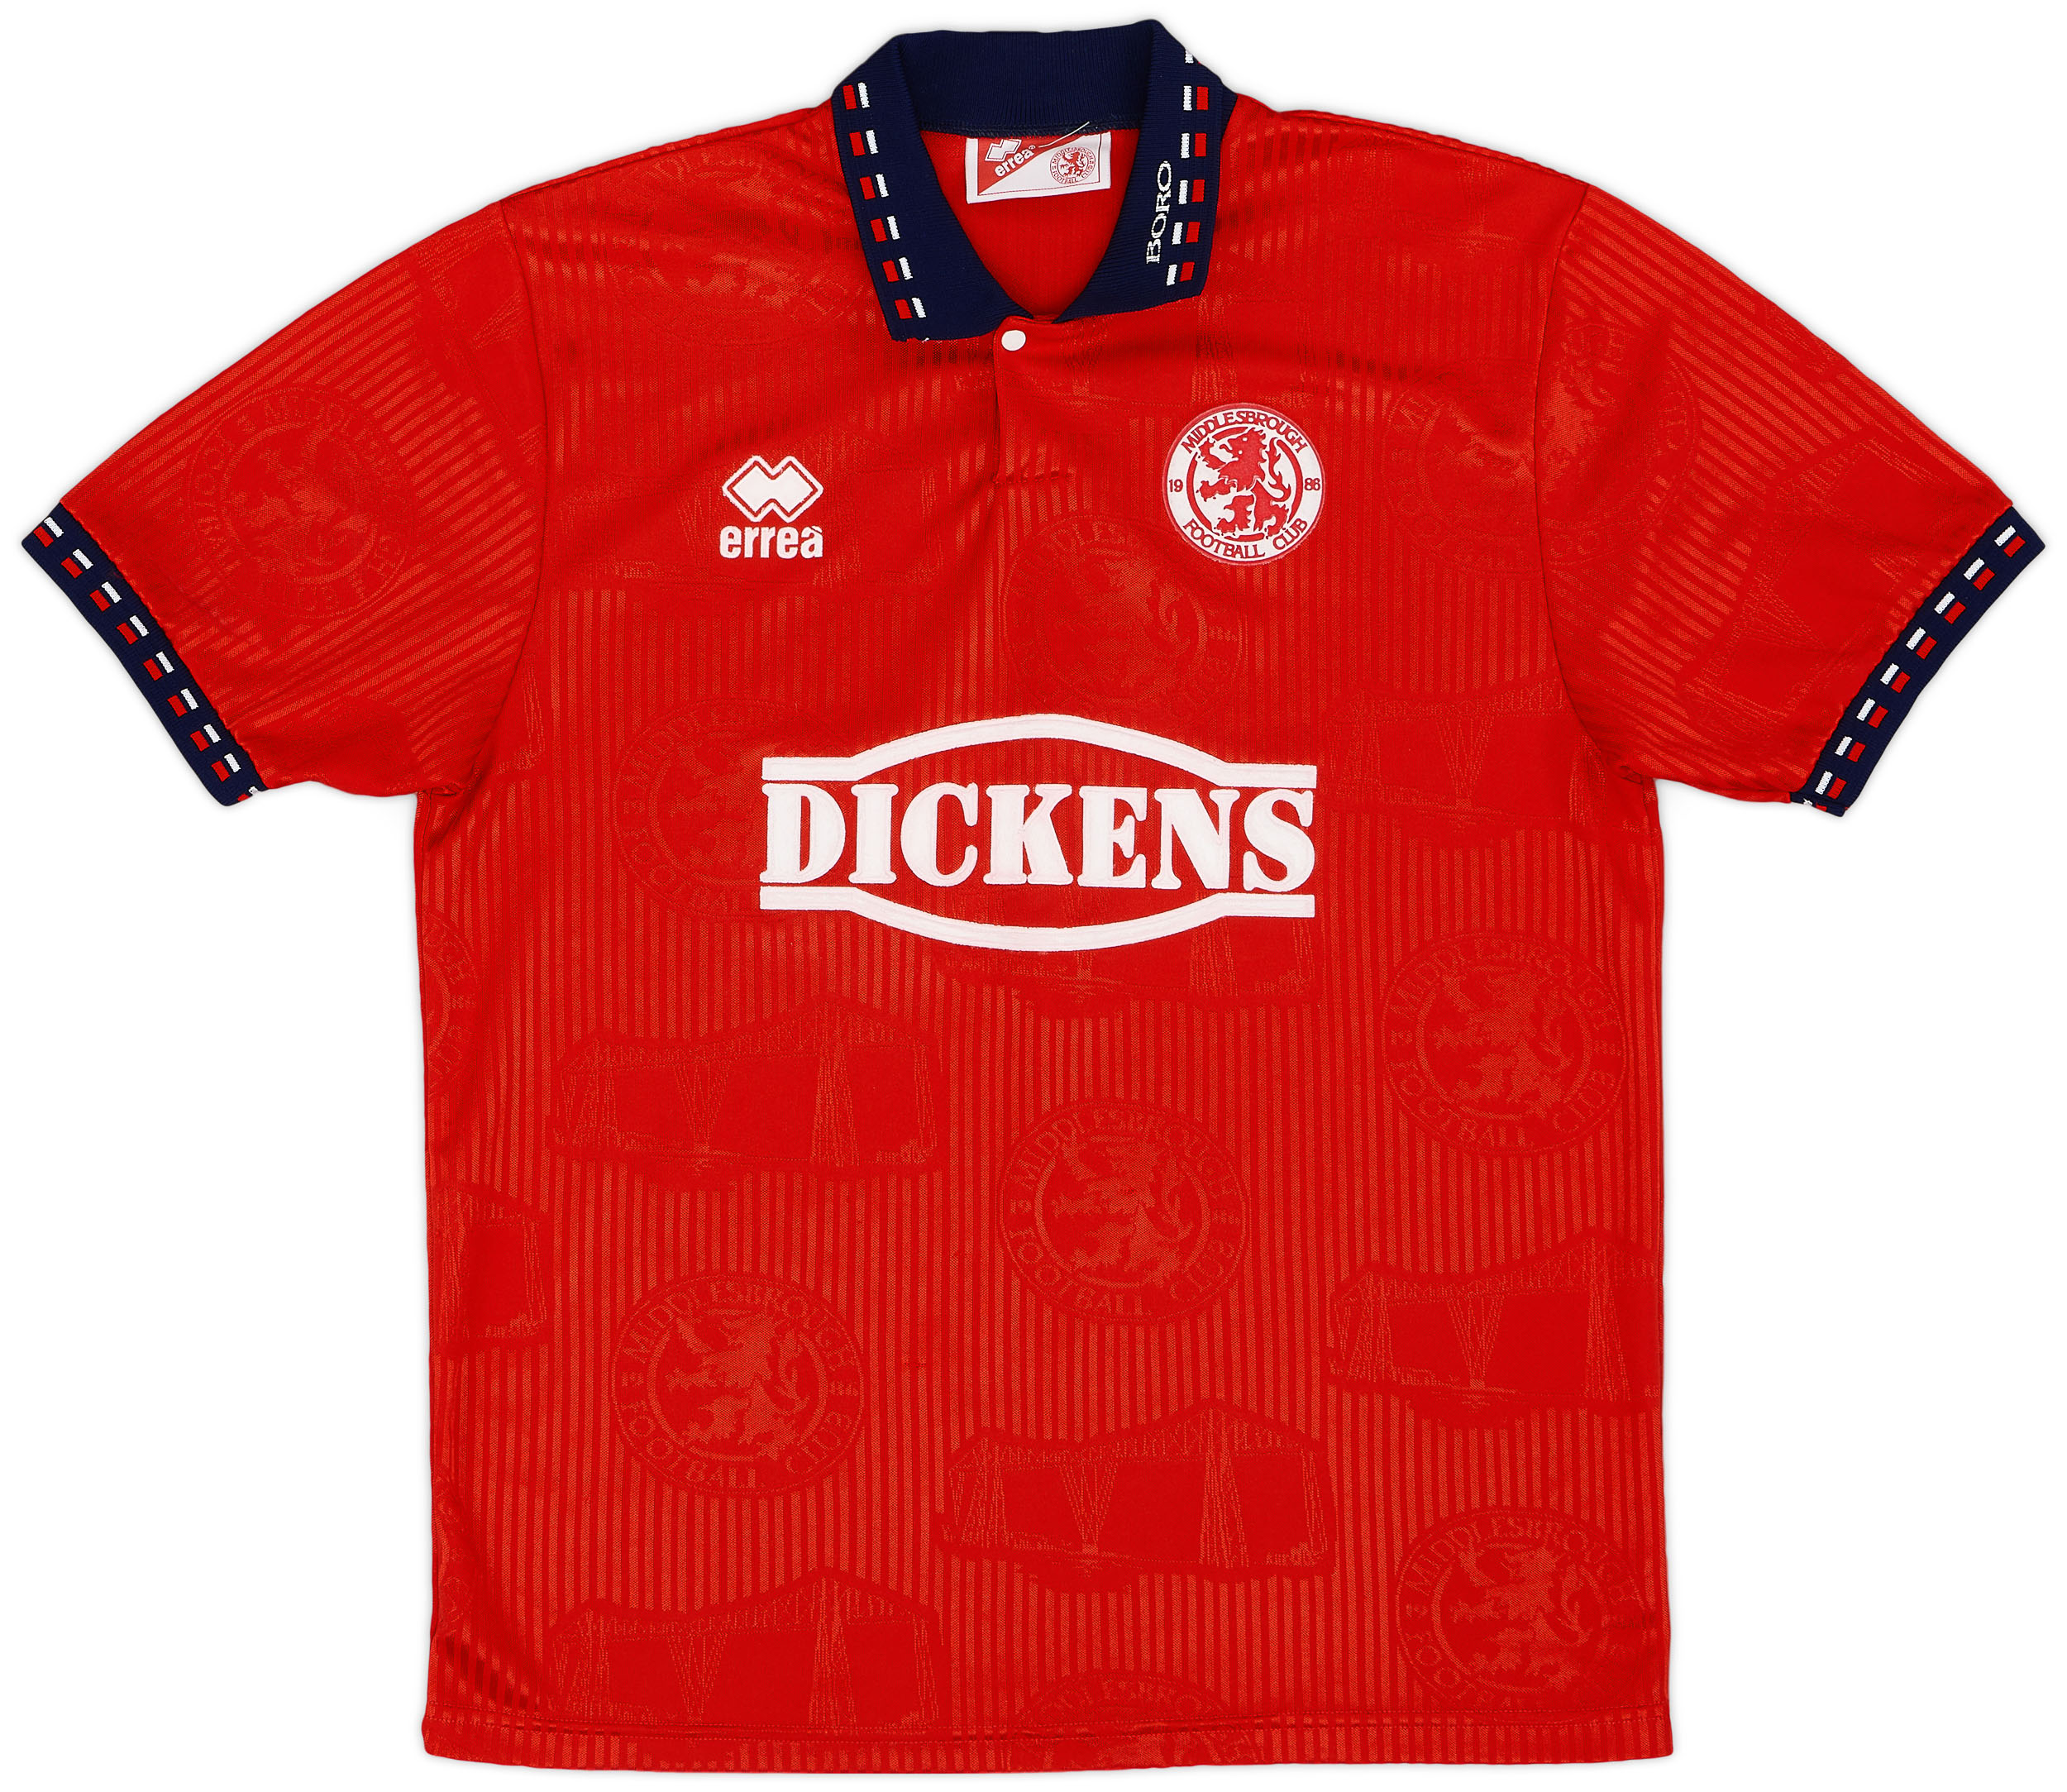 1994-95 Middlesbrough Signed Home Shirt - 8/10 - ()